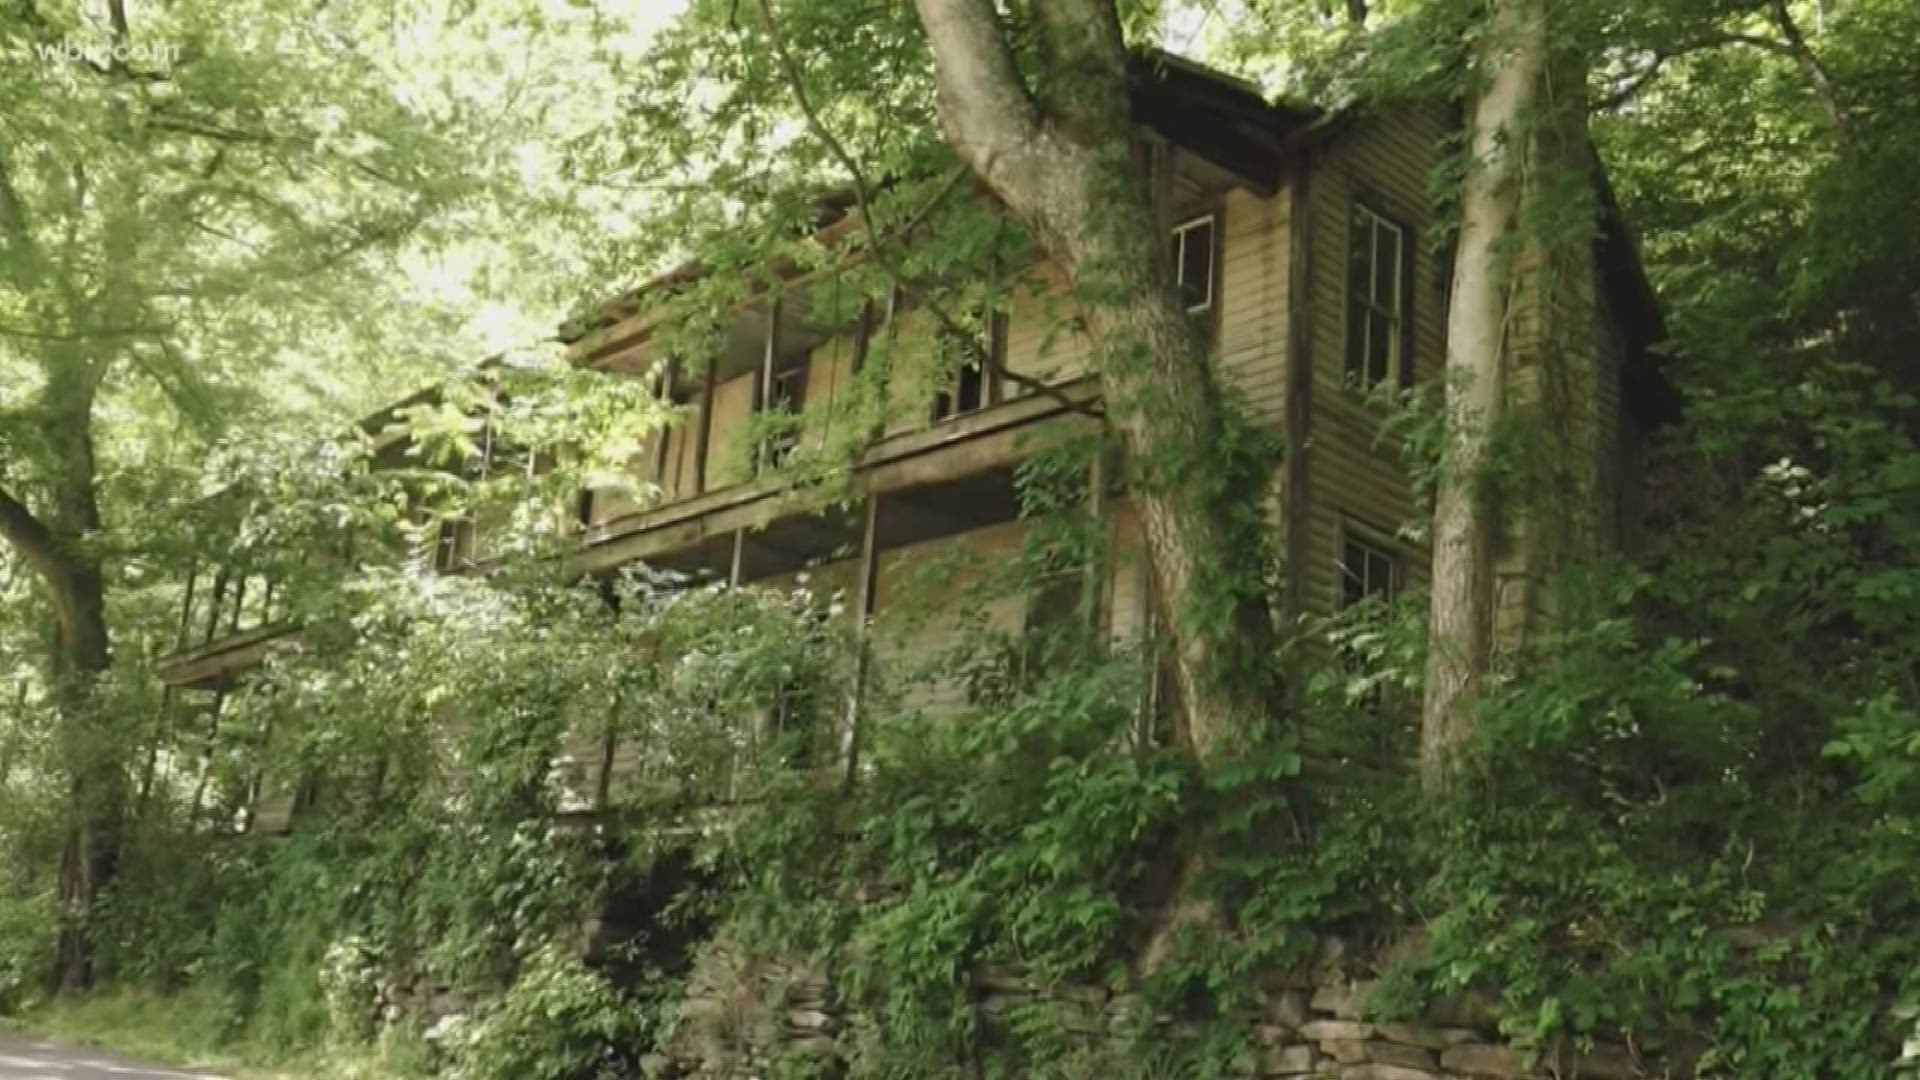 This little hotel was once a riverfront resort. Now, it is half-hidden on a hillside waiting for the day guests will fill its rooms once again.